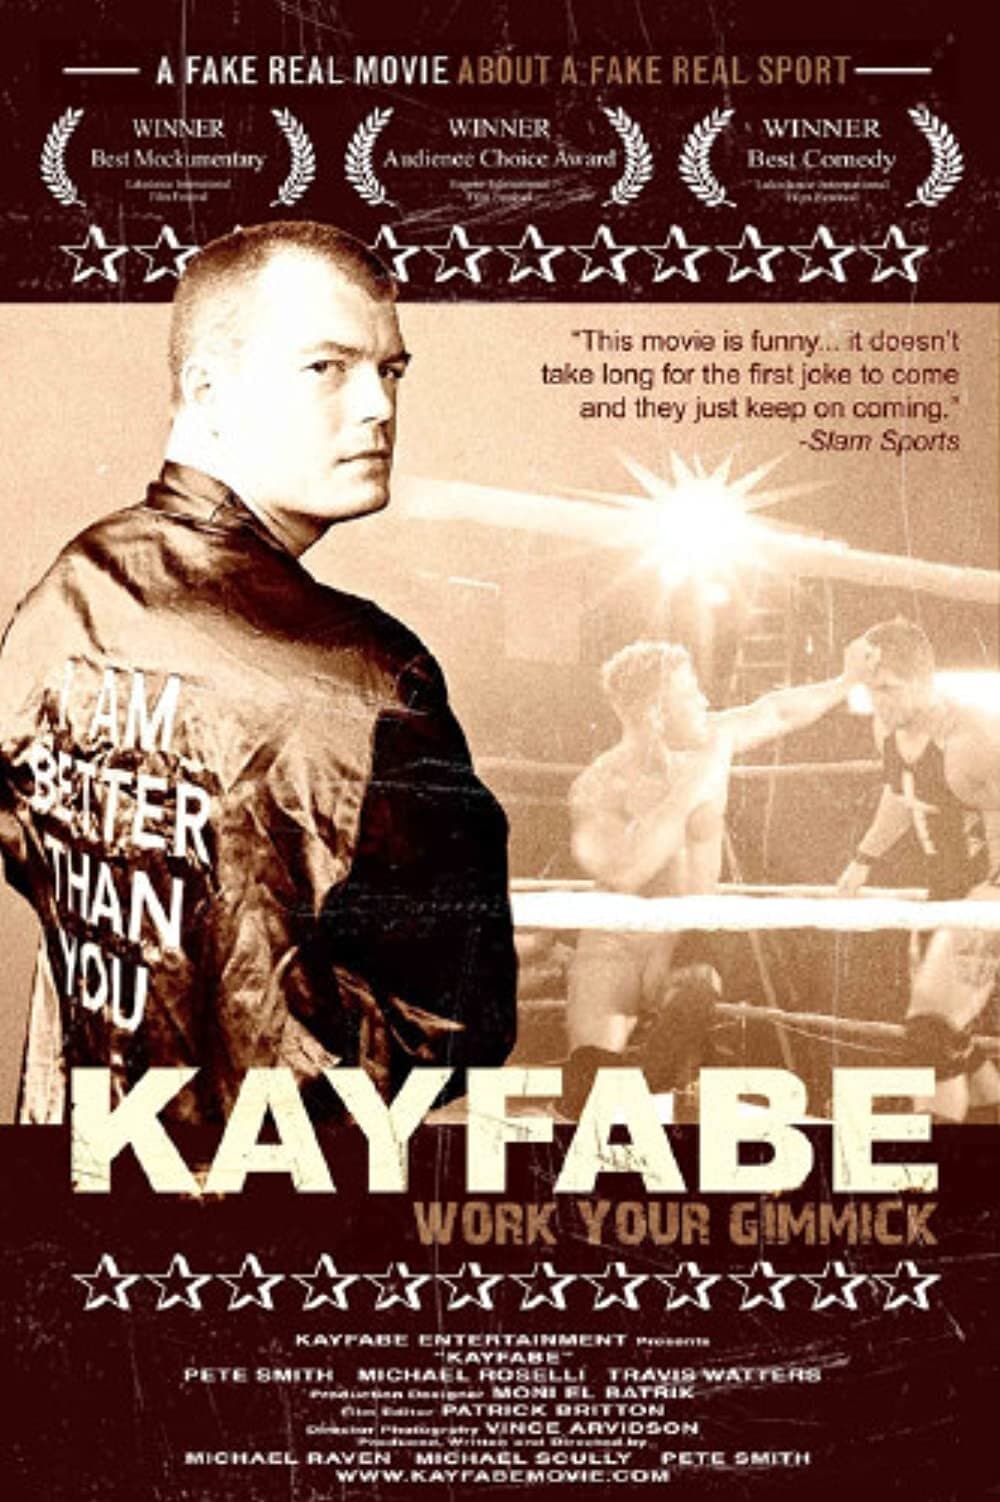 Kayfabe: A Fake Real Movie About A Fake Real Sport